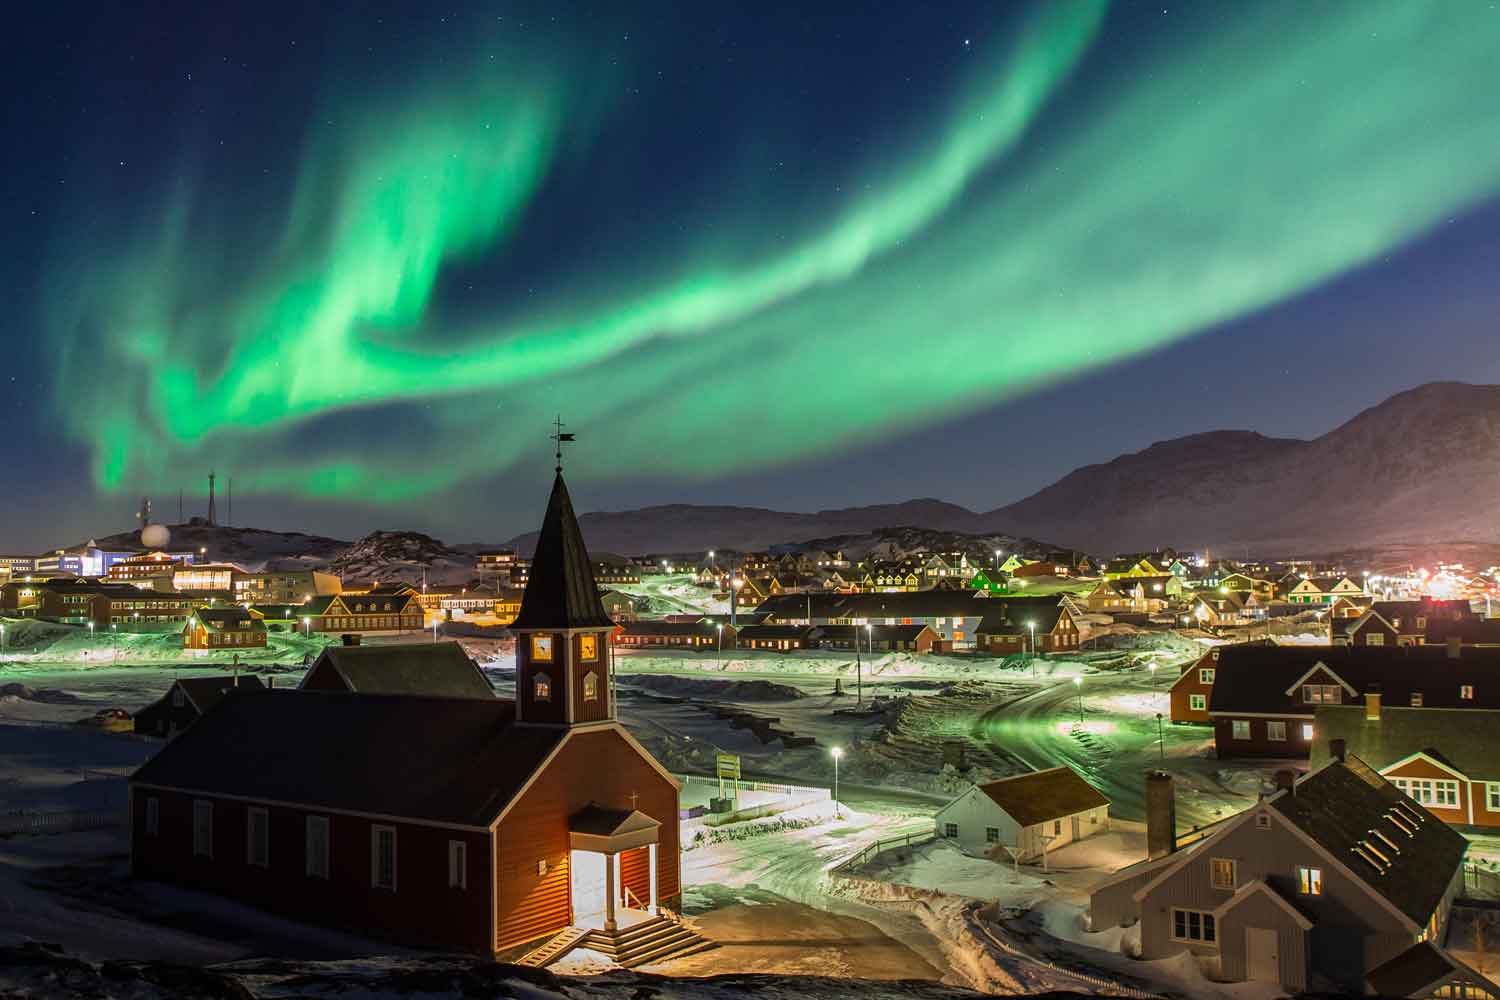 The Northern lights are in the sky over a city of homes and other small buildings.